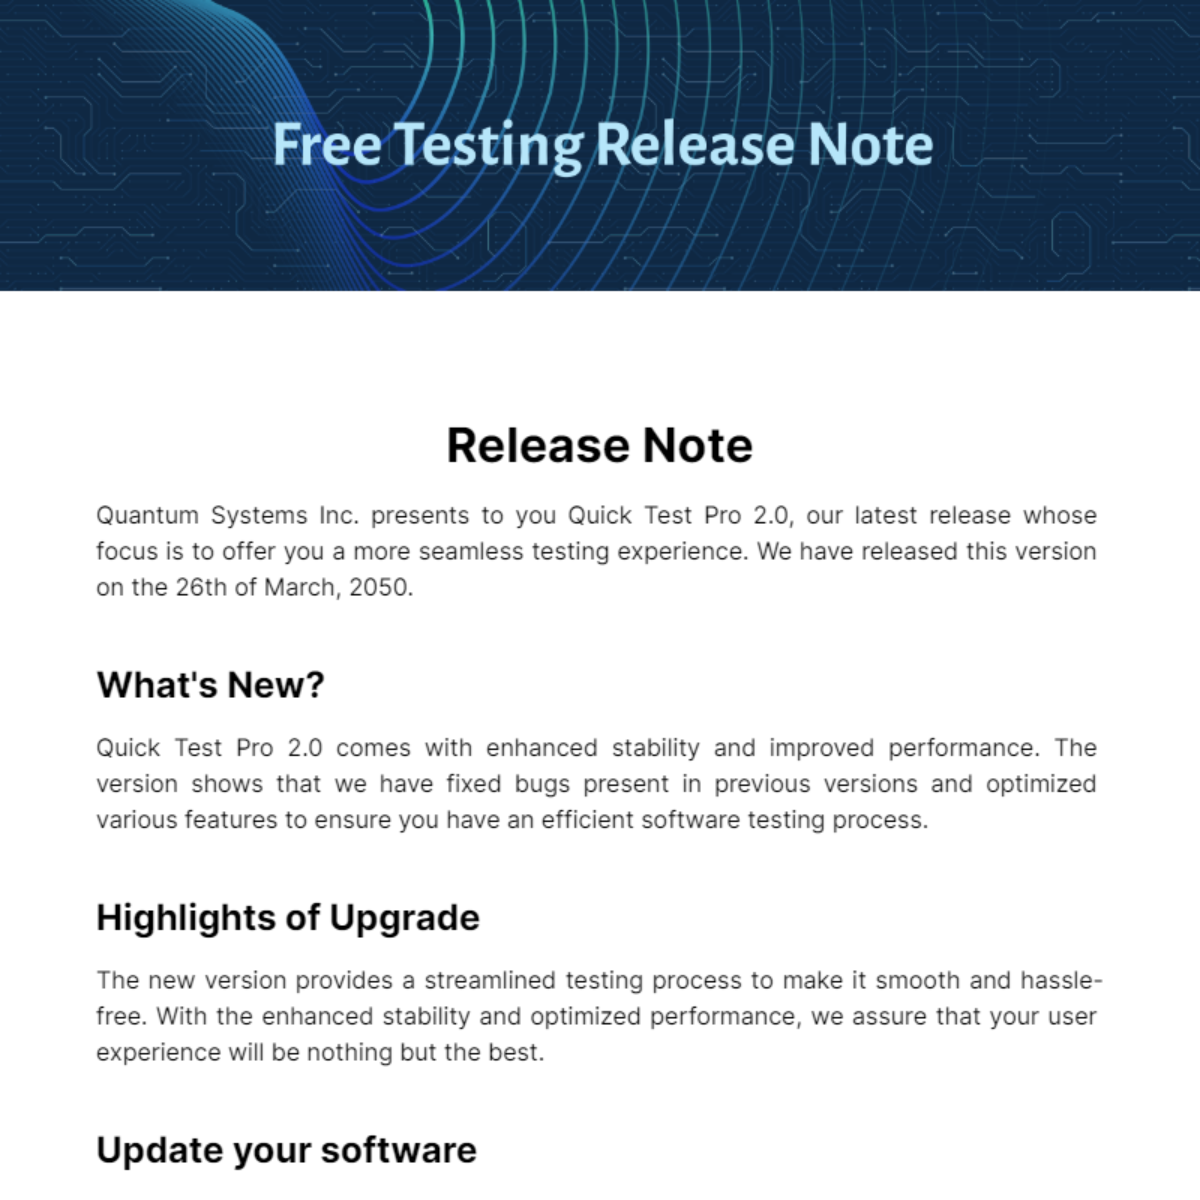 Free Testing Release Note Template